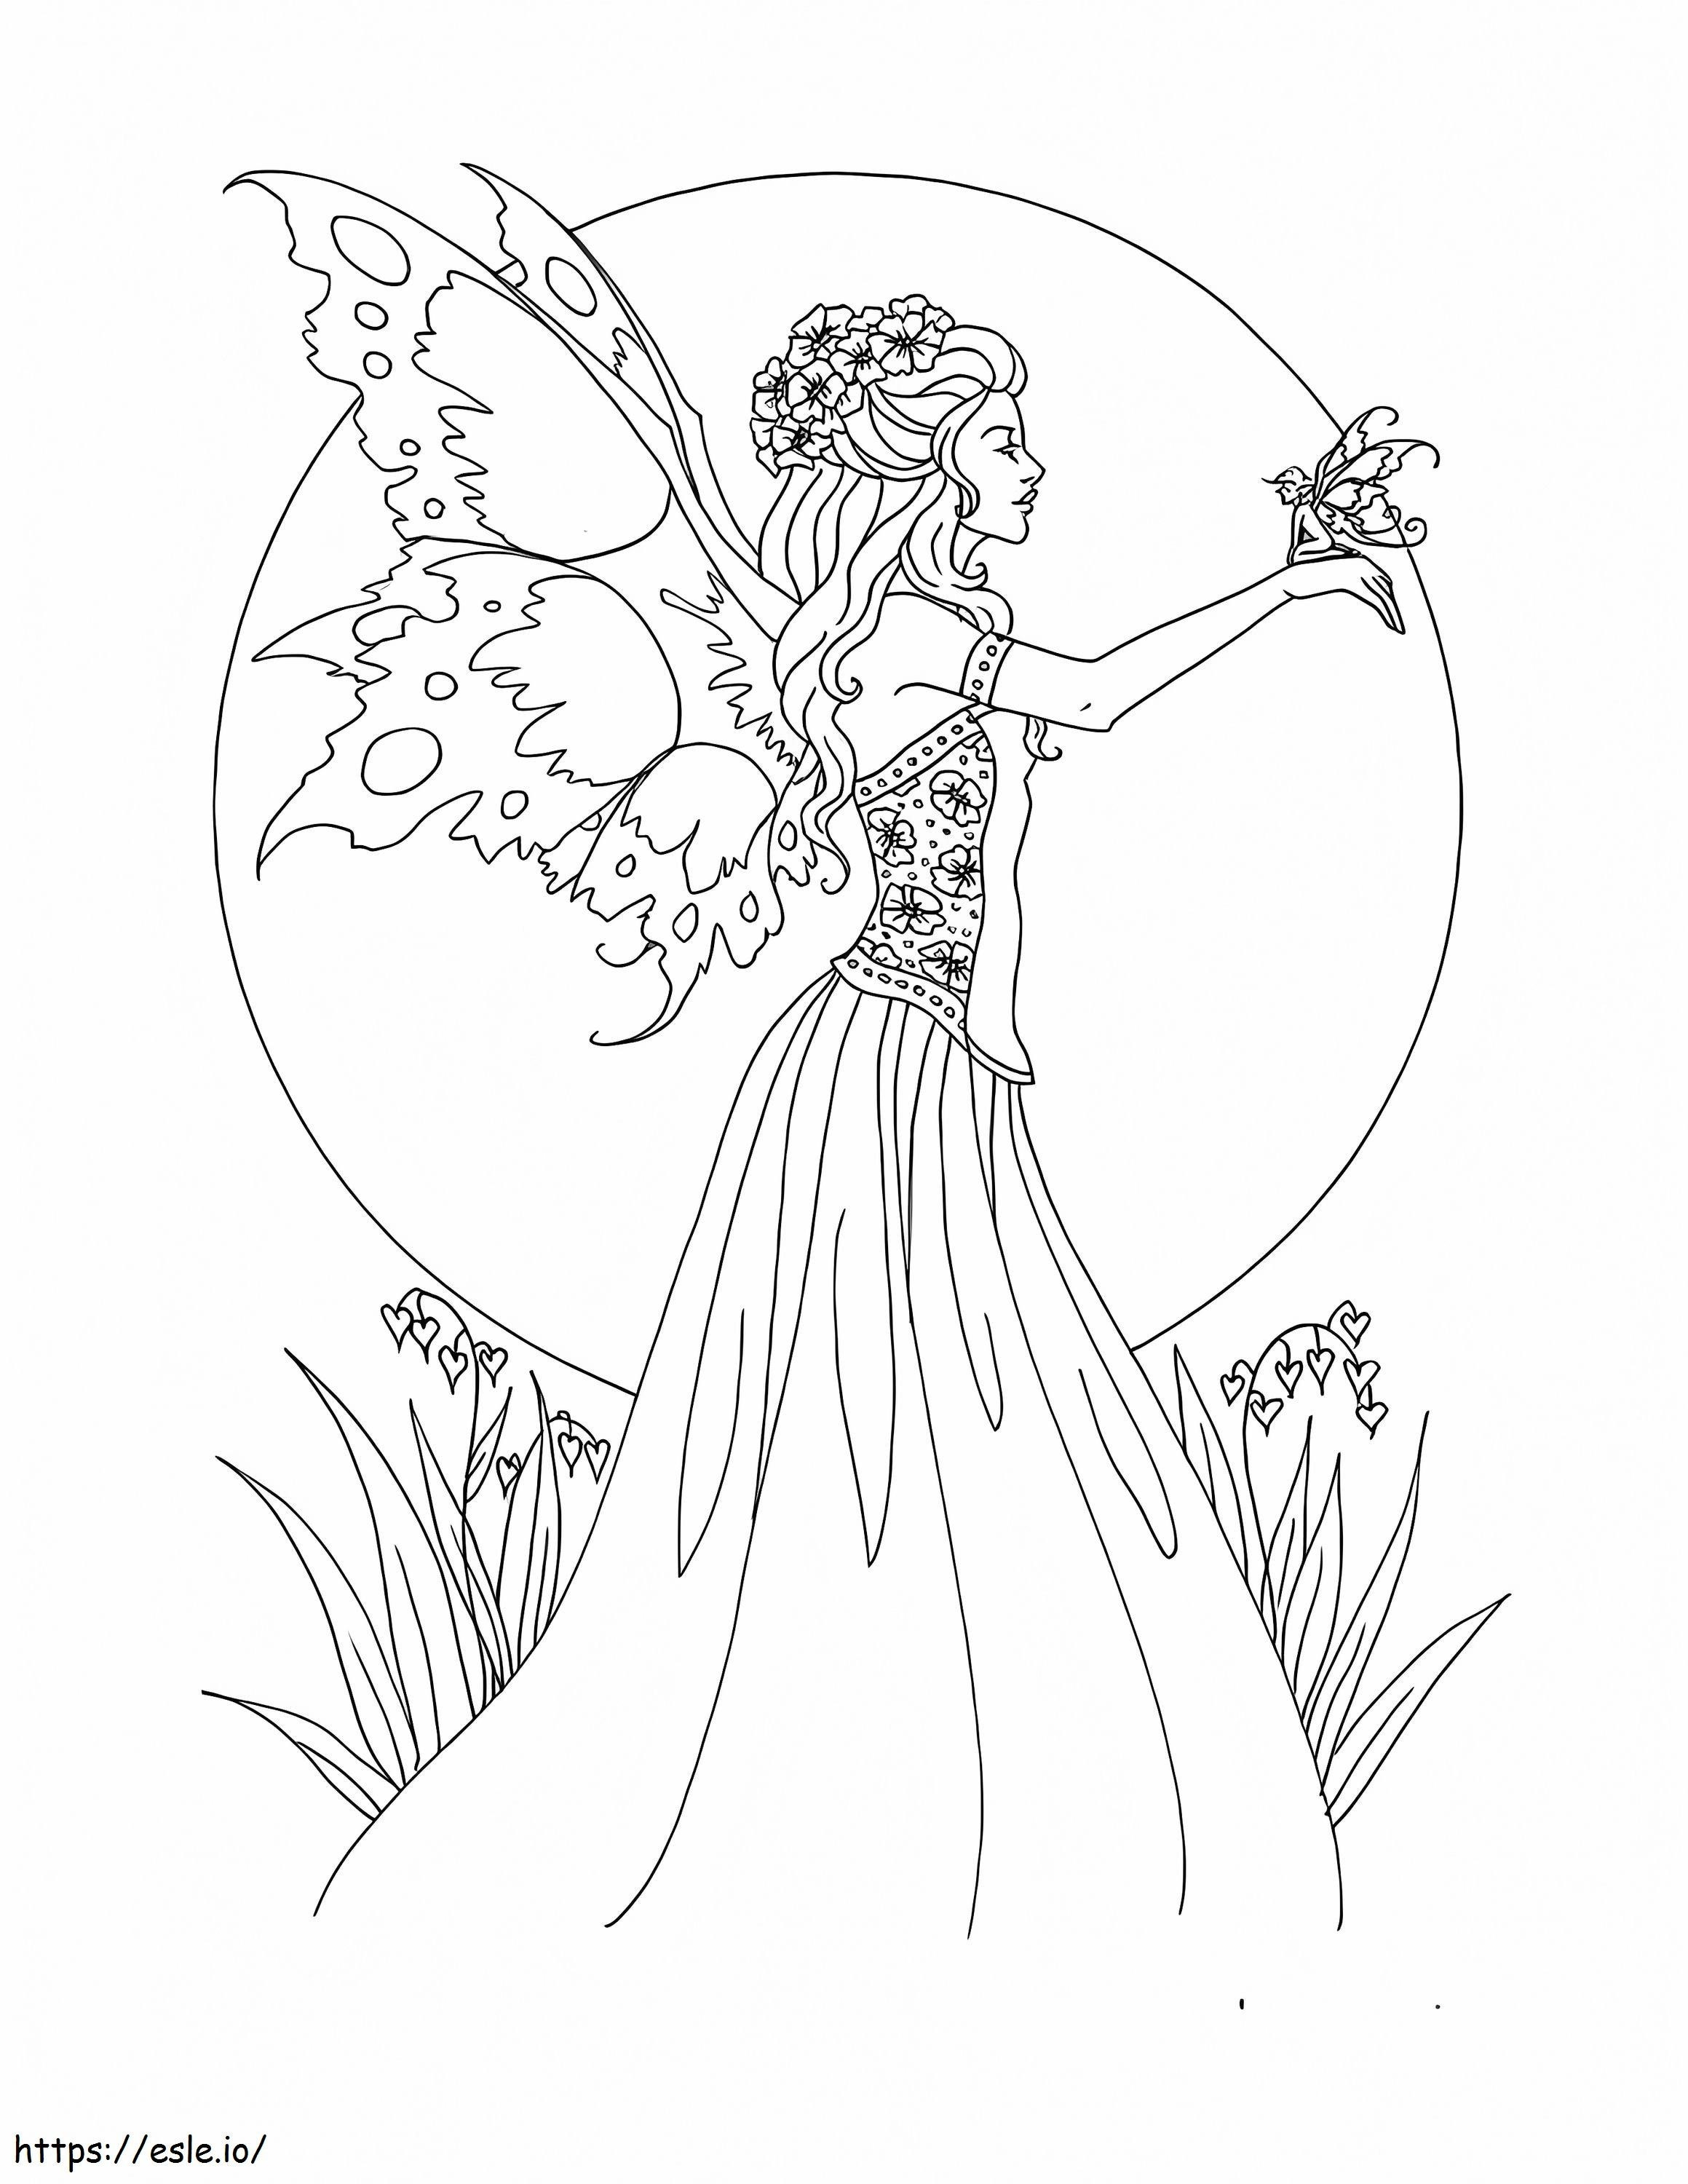 Belle Fee 5 coloring page